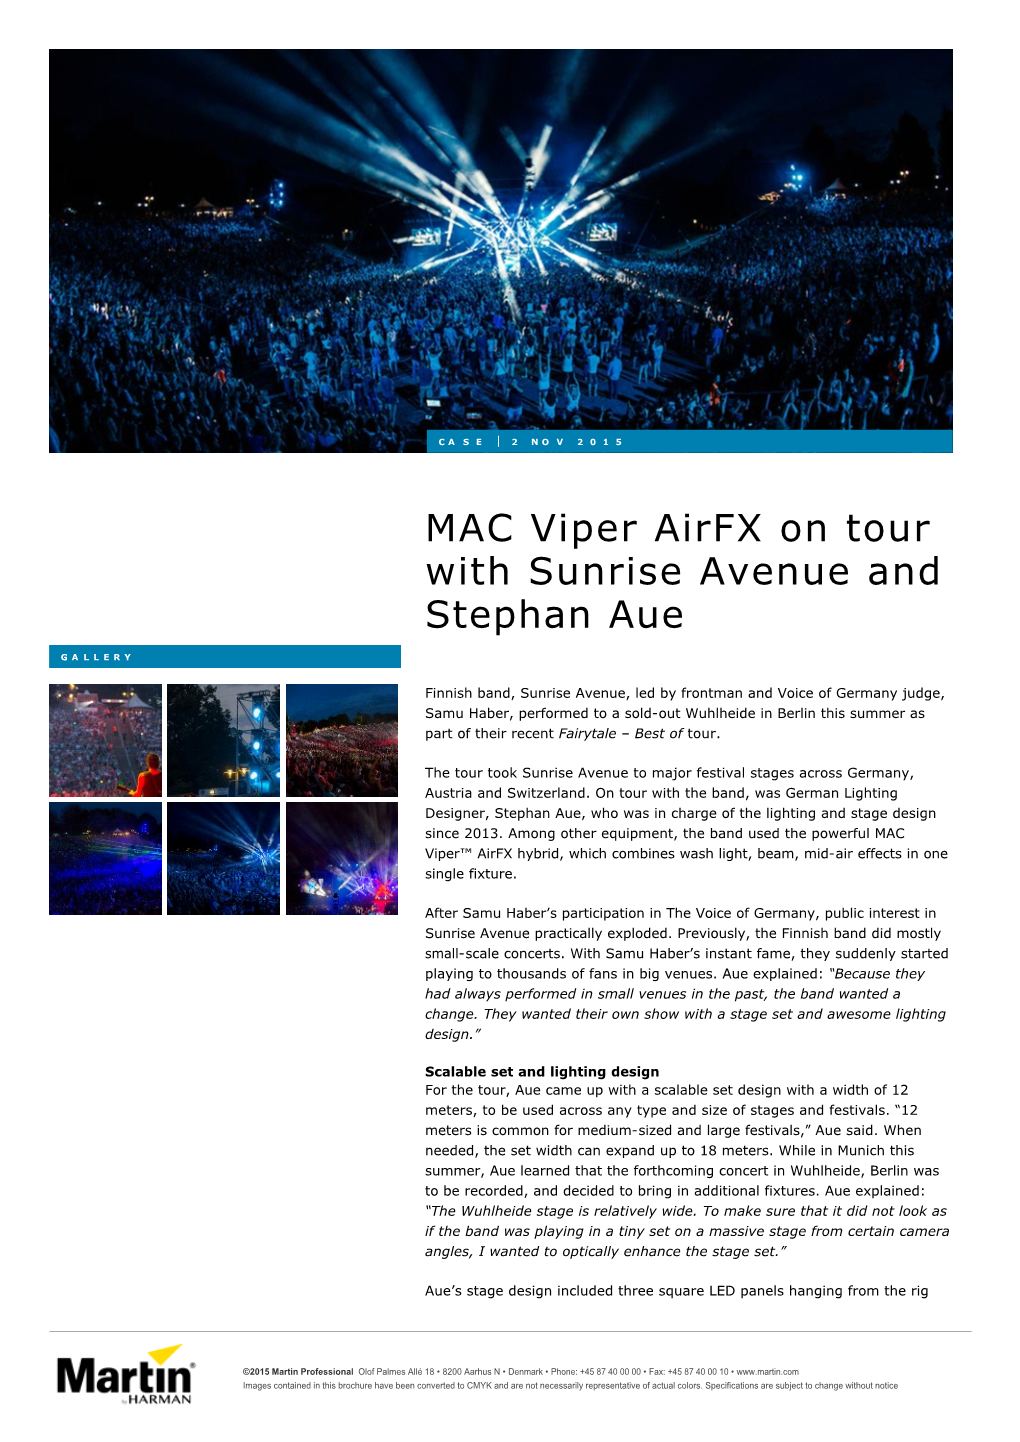 MAC Viper Airfx on Tour with Sunrise Avenue and Stephan Aue